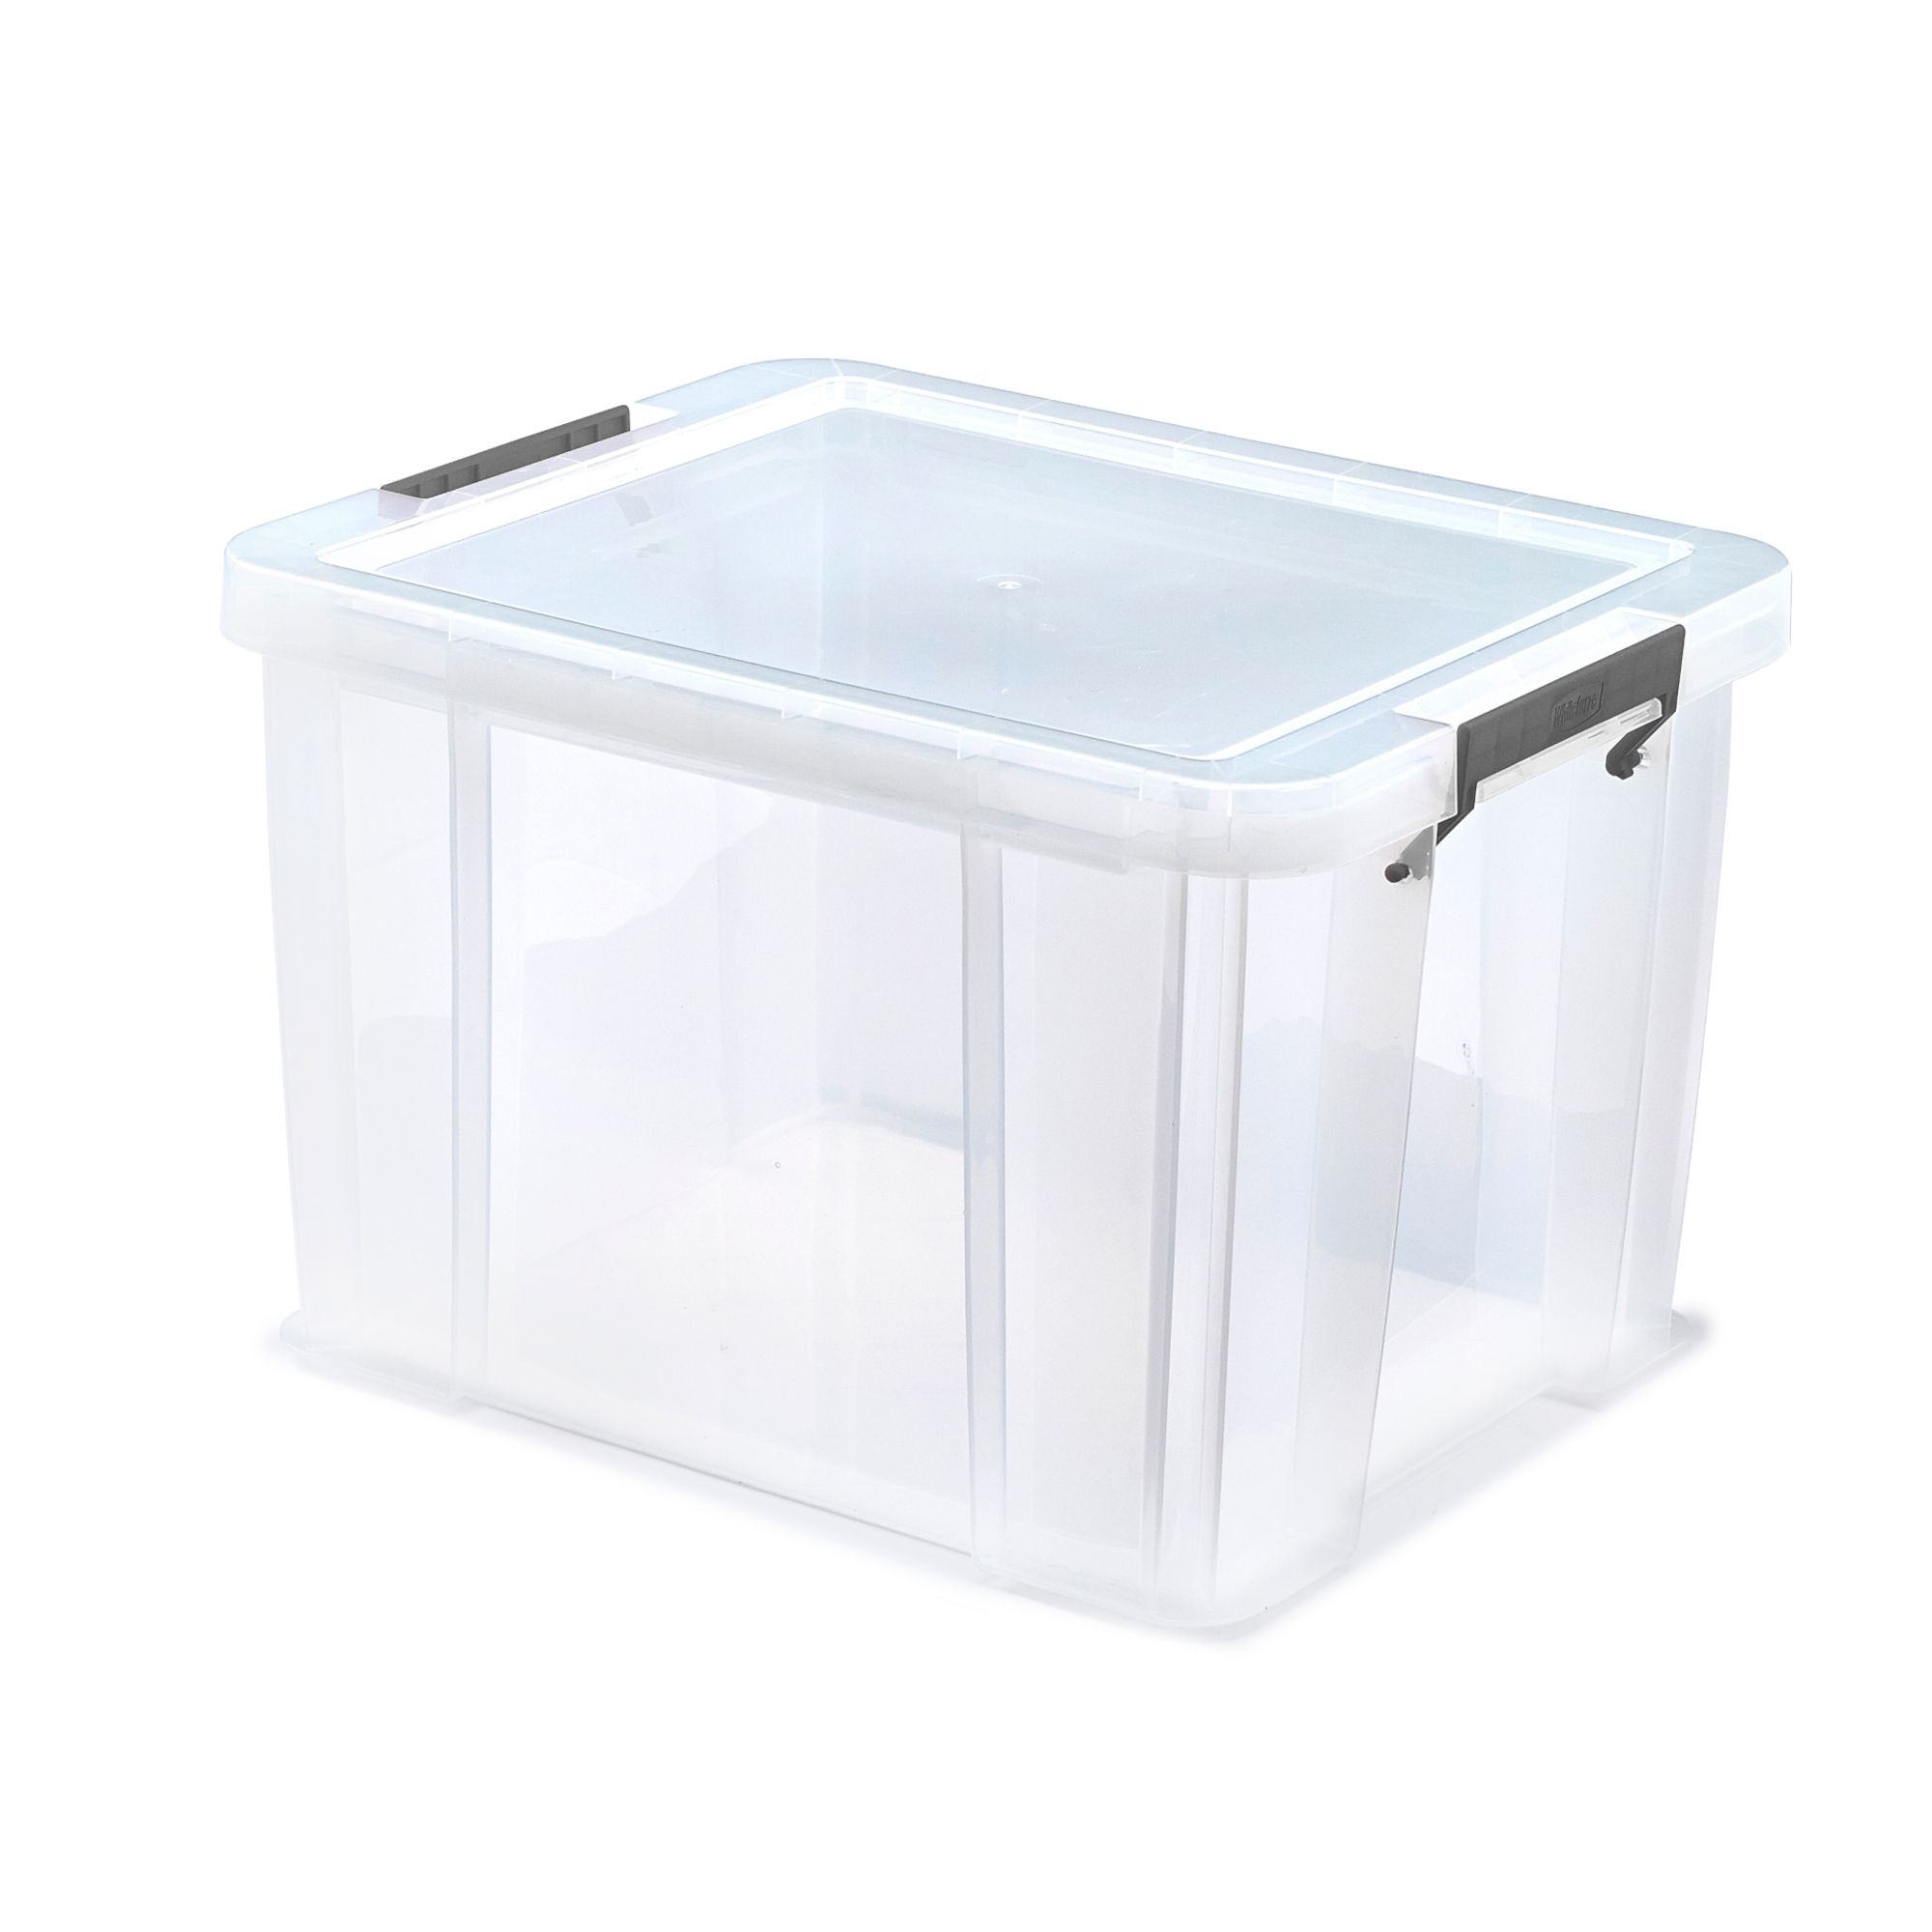 https://kingfisher.scene7.com/is/image/Kingfisher/allstore-heavy-duty-36l-large-plastic-stackable-storage-box-with-lid~5016447039393_01c?$MOB_PREV$&$width=768&$height=768